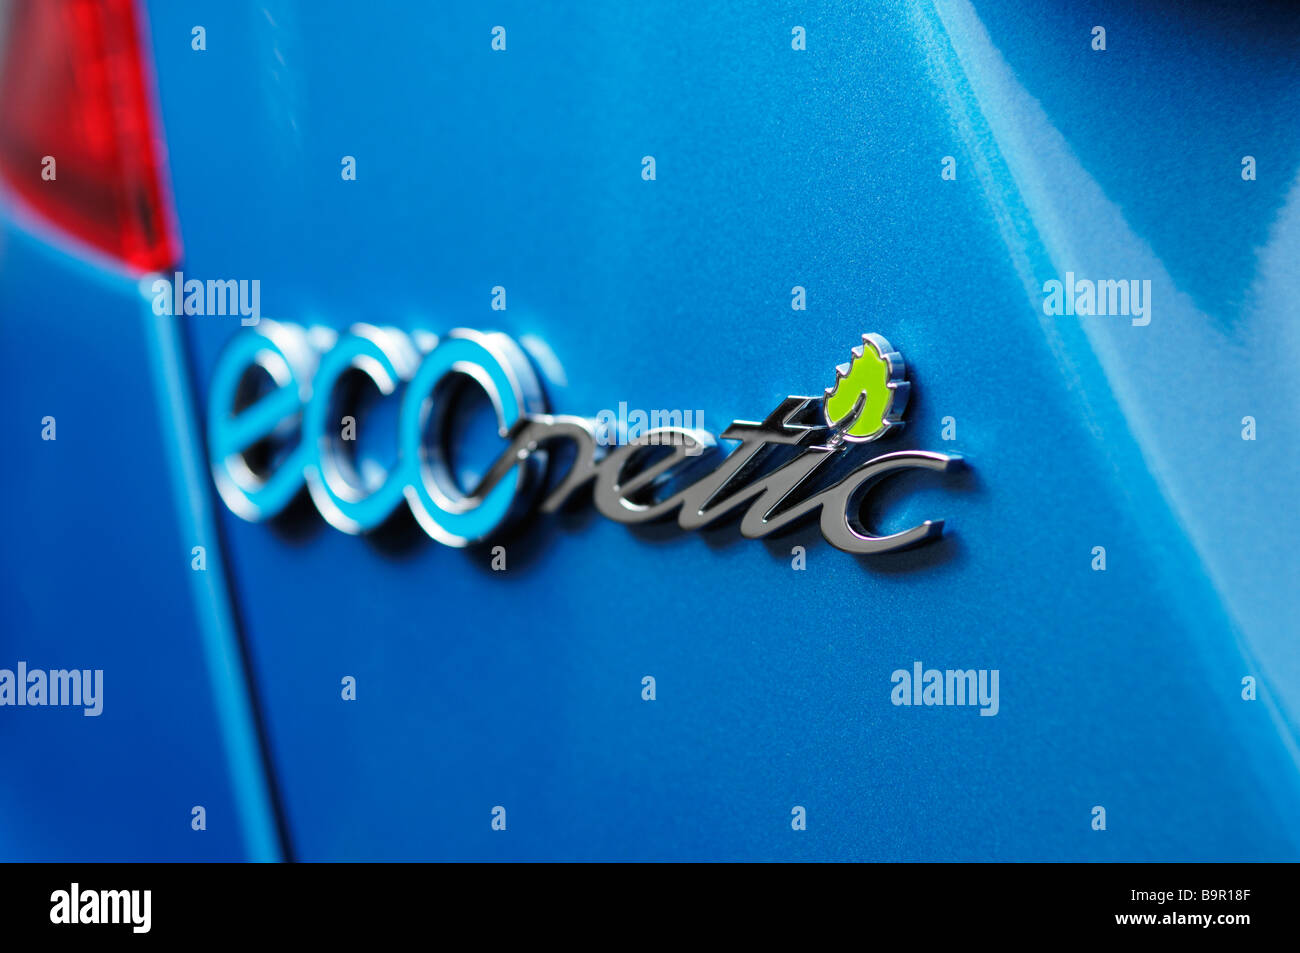 ECOnetic. The model name given to the Ford range of green motor cars designed for lowest carbon dioxide emissions and best fuel economy. This particular model is the Ford Fiesta 1.6 TDCi ECOnetic, one of the greenest cars available in Europe at it's launch in 2009. Stock Photo